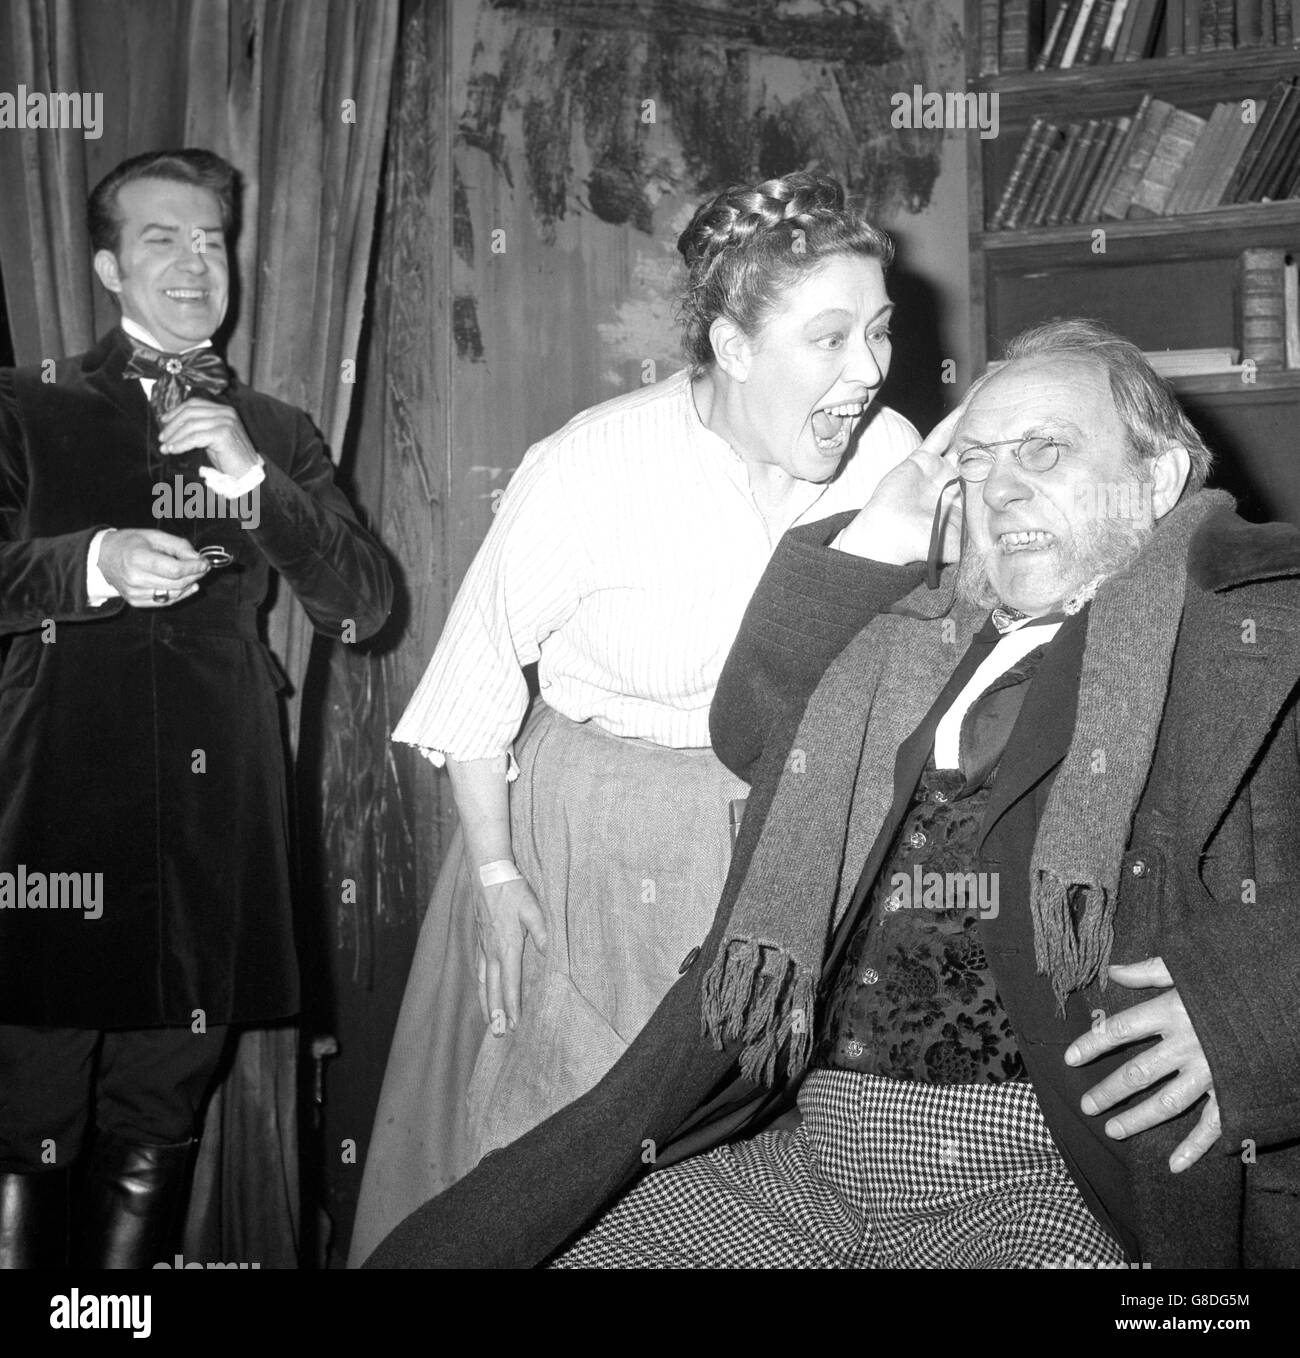 The wrath of Peggy Mount (as Ma Wolff, the washerwoman) descends on Russell Waters (as Kruger), during rehearsal at the Mermaid Theatre for The Beaver Coat, a comedy by Gerhart Hauptmann. Stock Photo